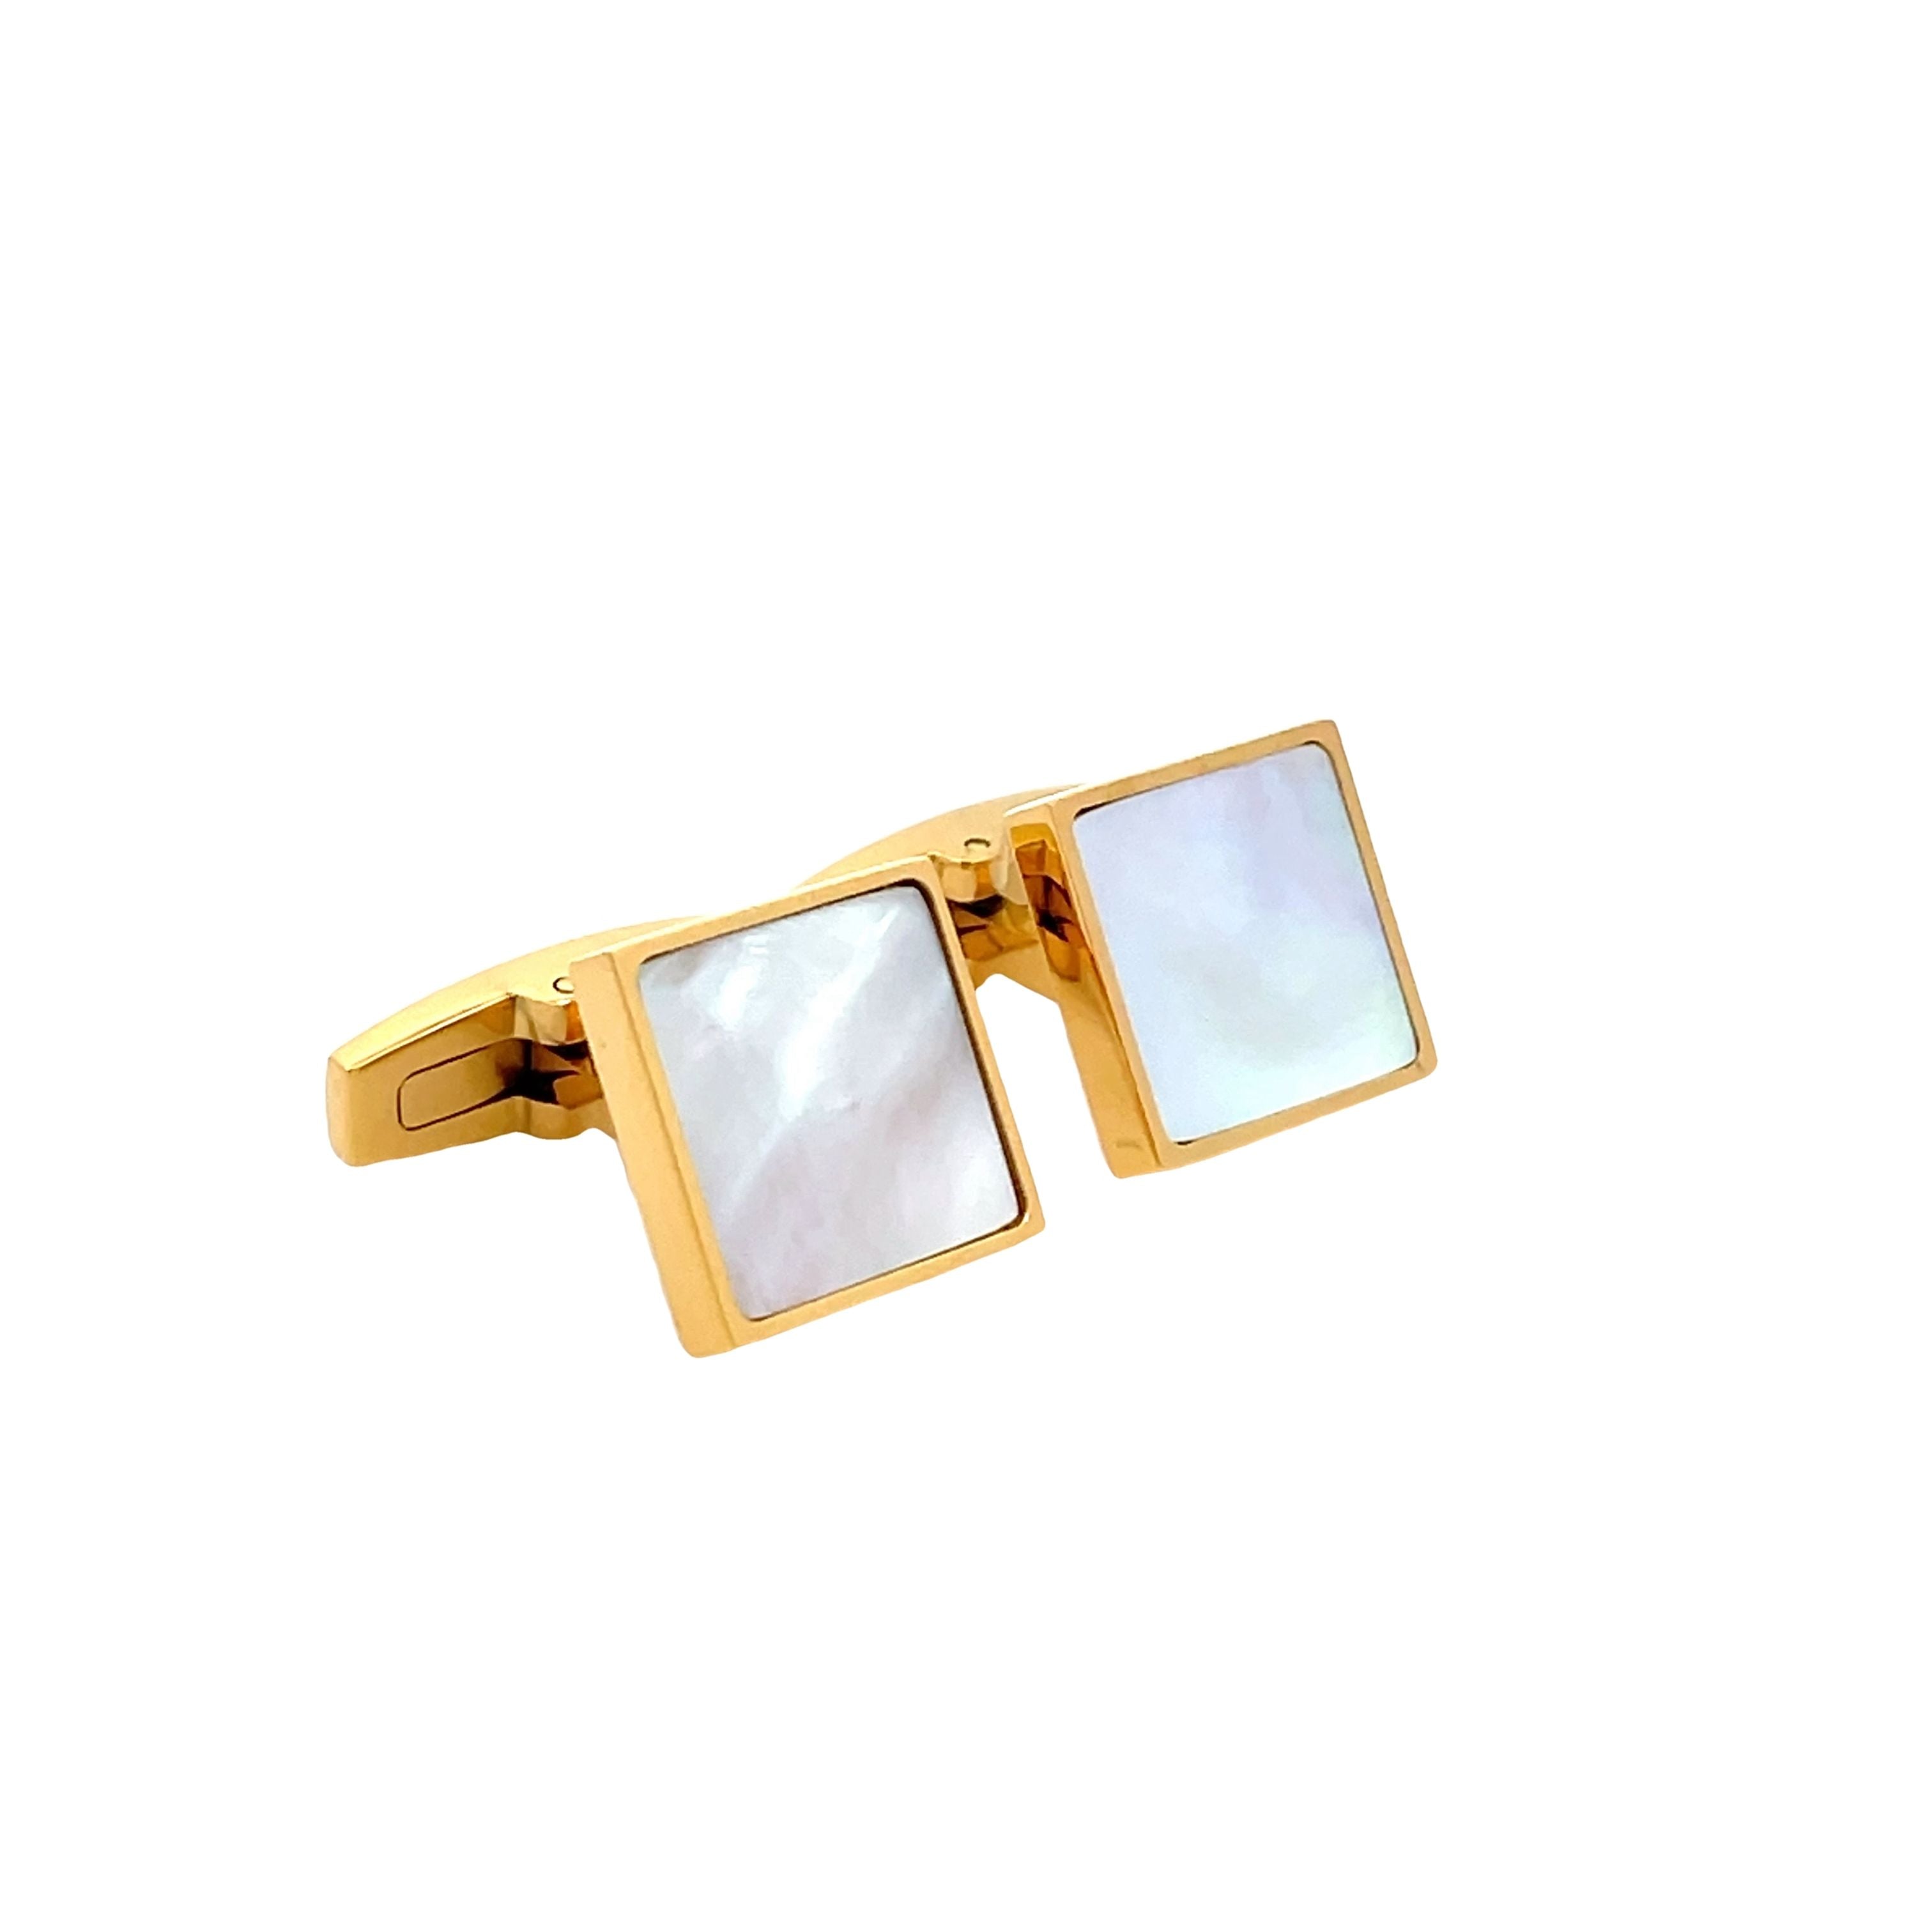 Gold Plated Stainless Steel White Mother Of Pearl Square Cufflinks